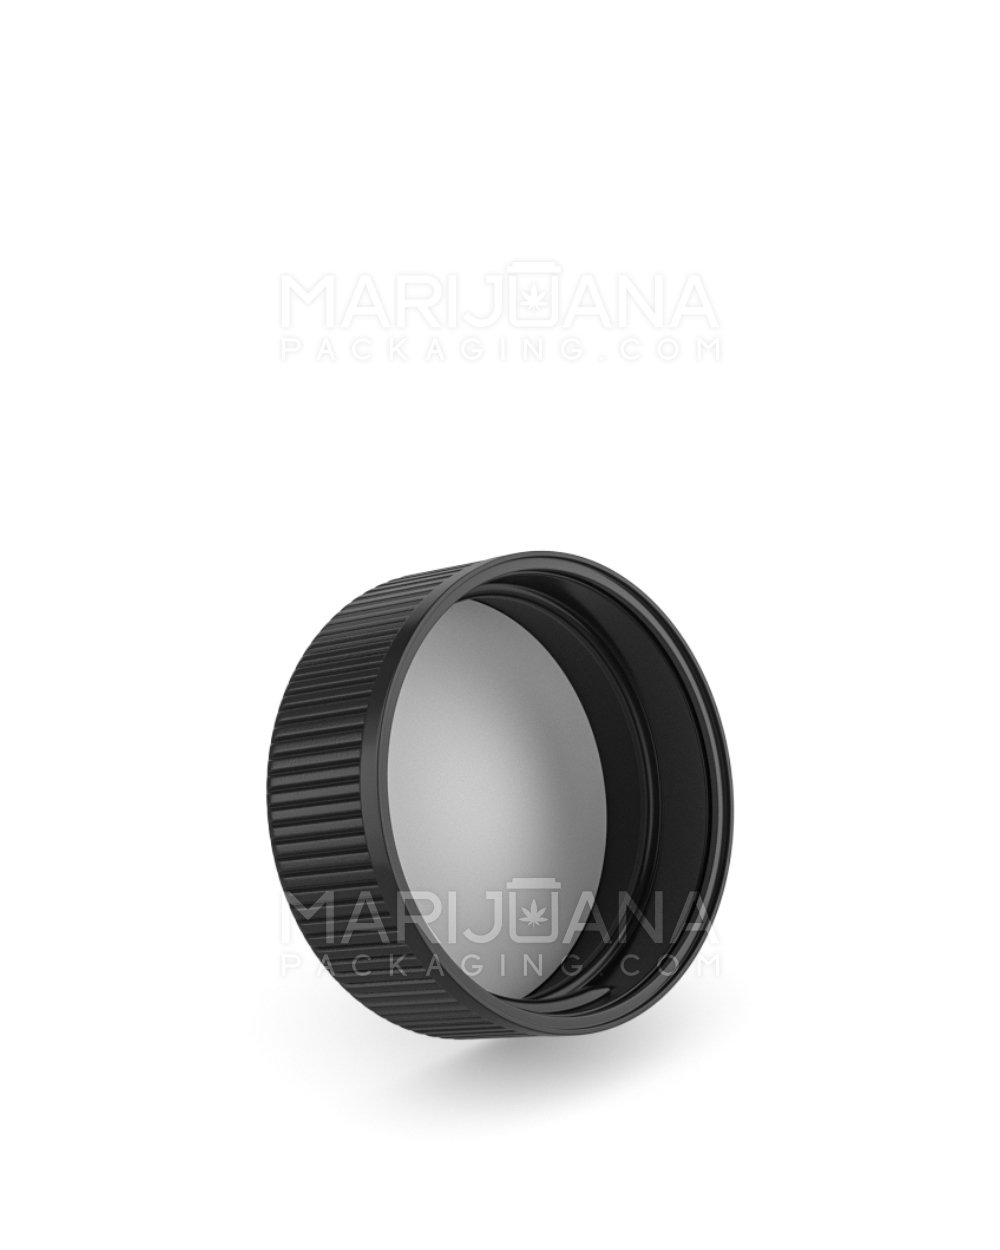 Child Resistant | Ribbed Push Down and Turn Plastic Caps w/ Text & Foam Liner | 38mm - Semi Gloss Black - 84 Count - 2